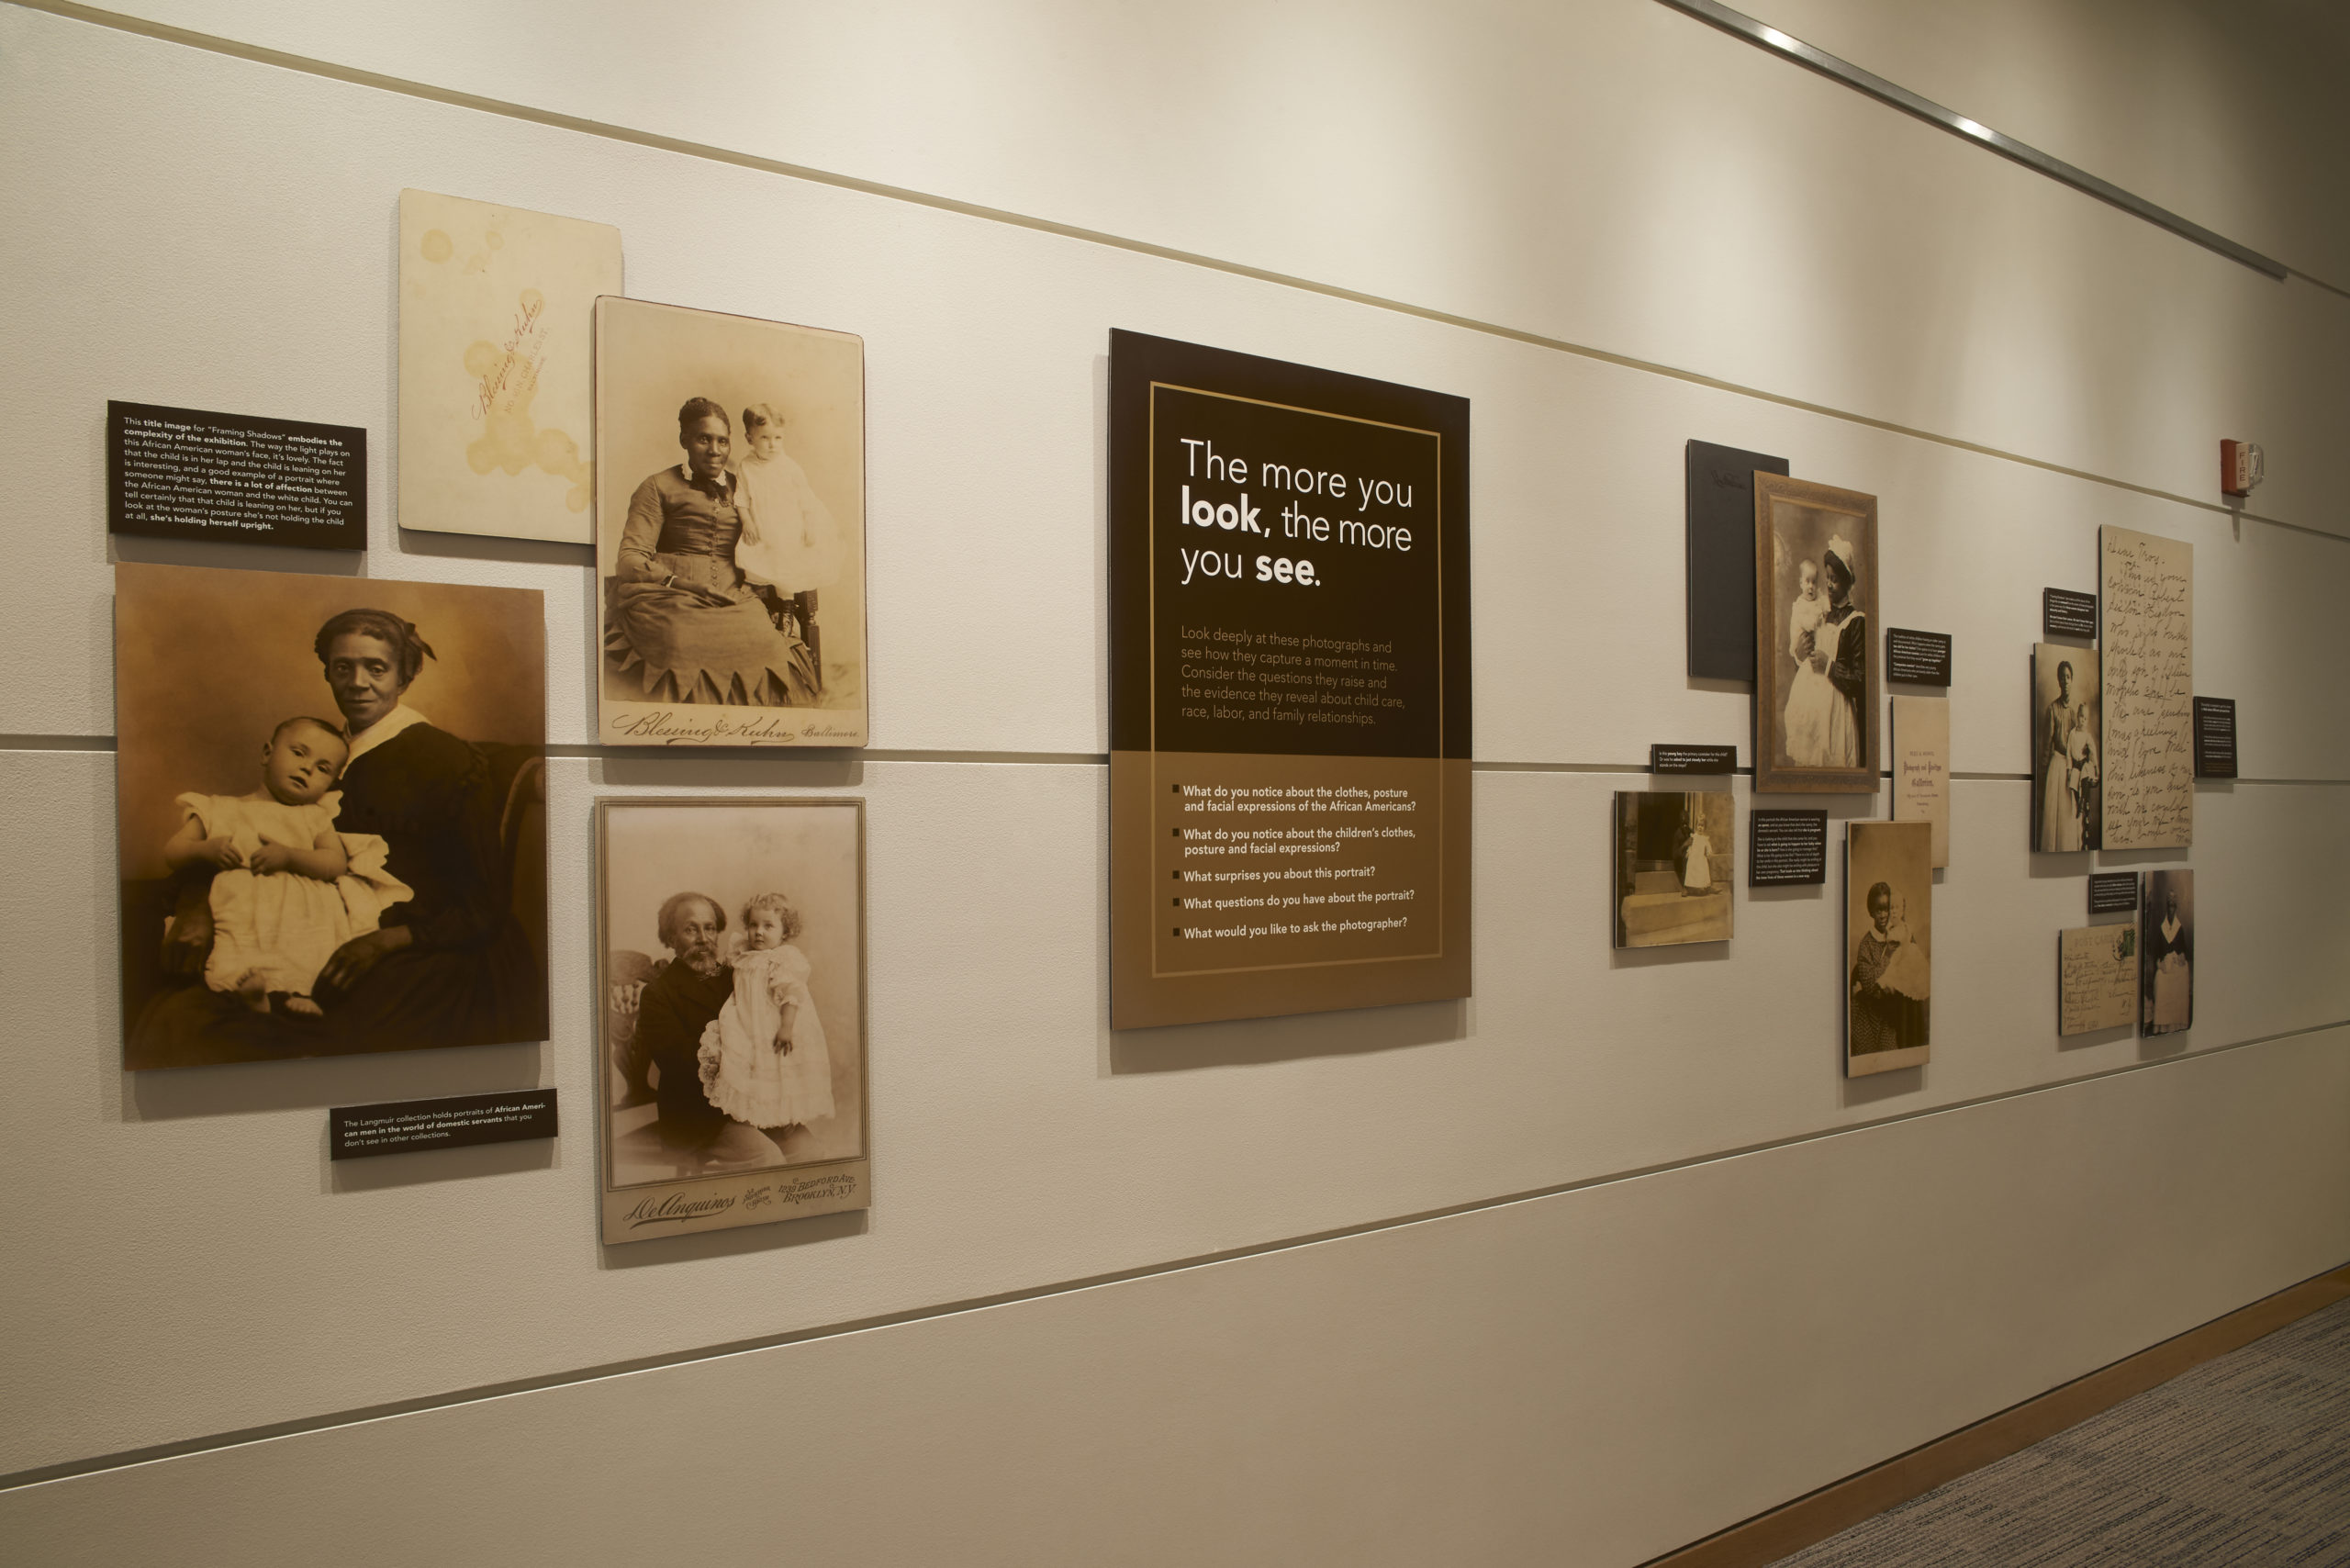 Photograph of exhibit corridor walls filled with photo portraits and text